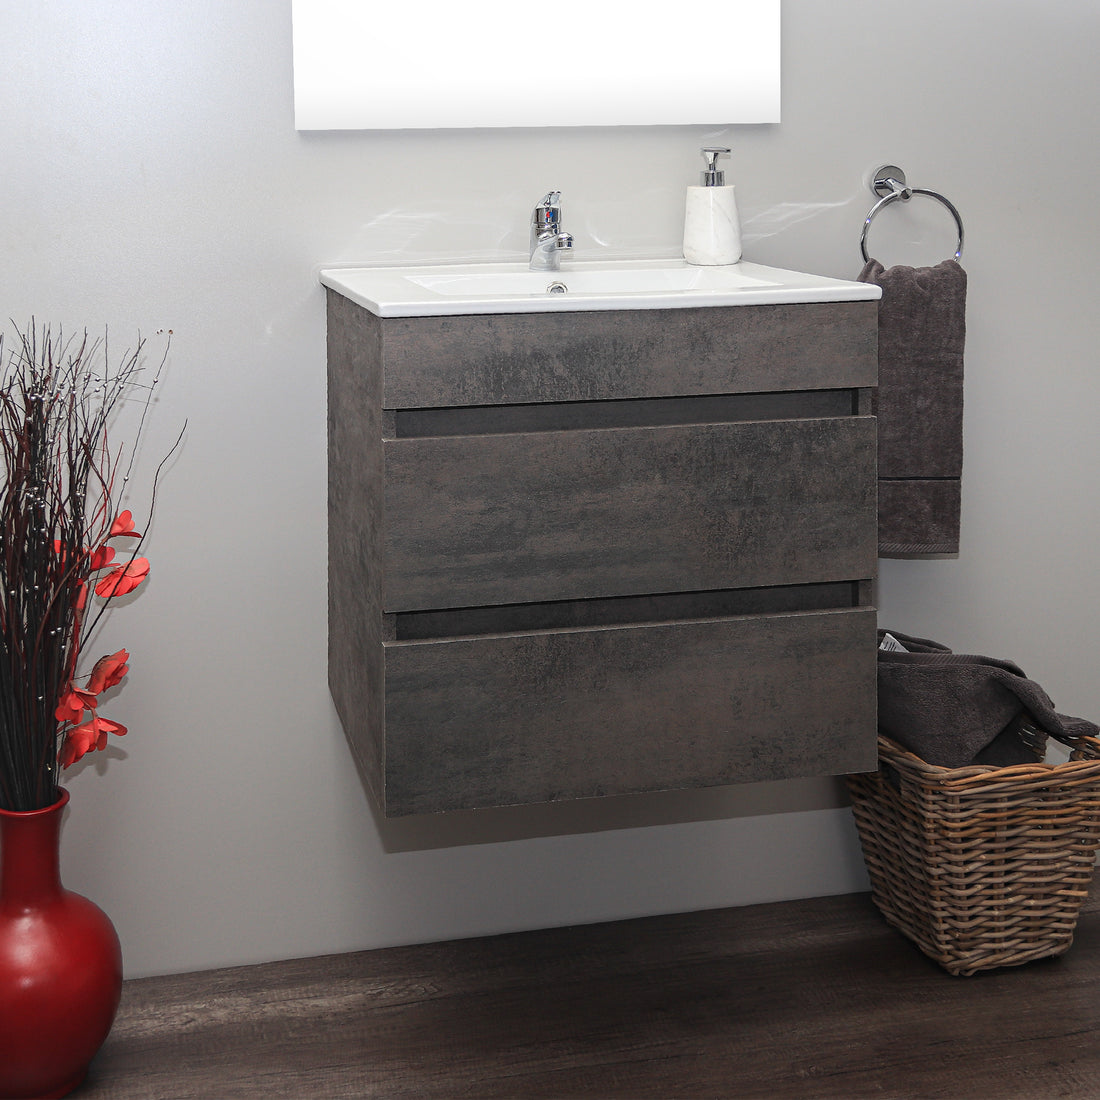 Transform Your Projects with Pennyware Distributors' Custom Bathroom Furniture Designs